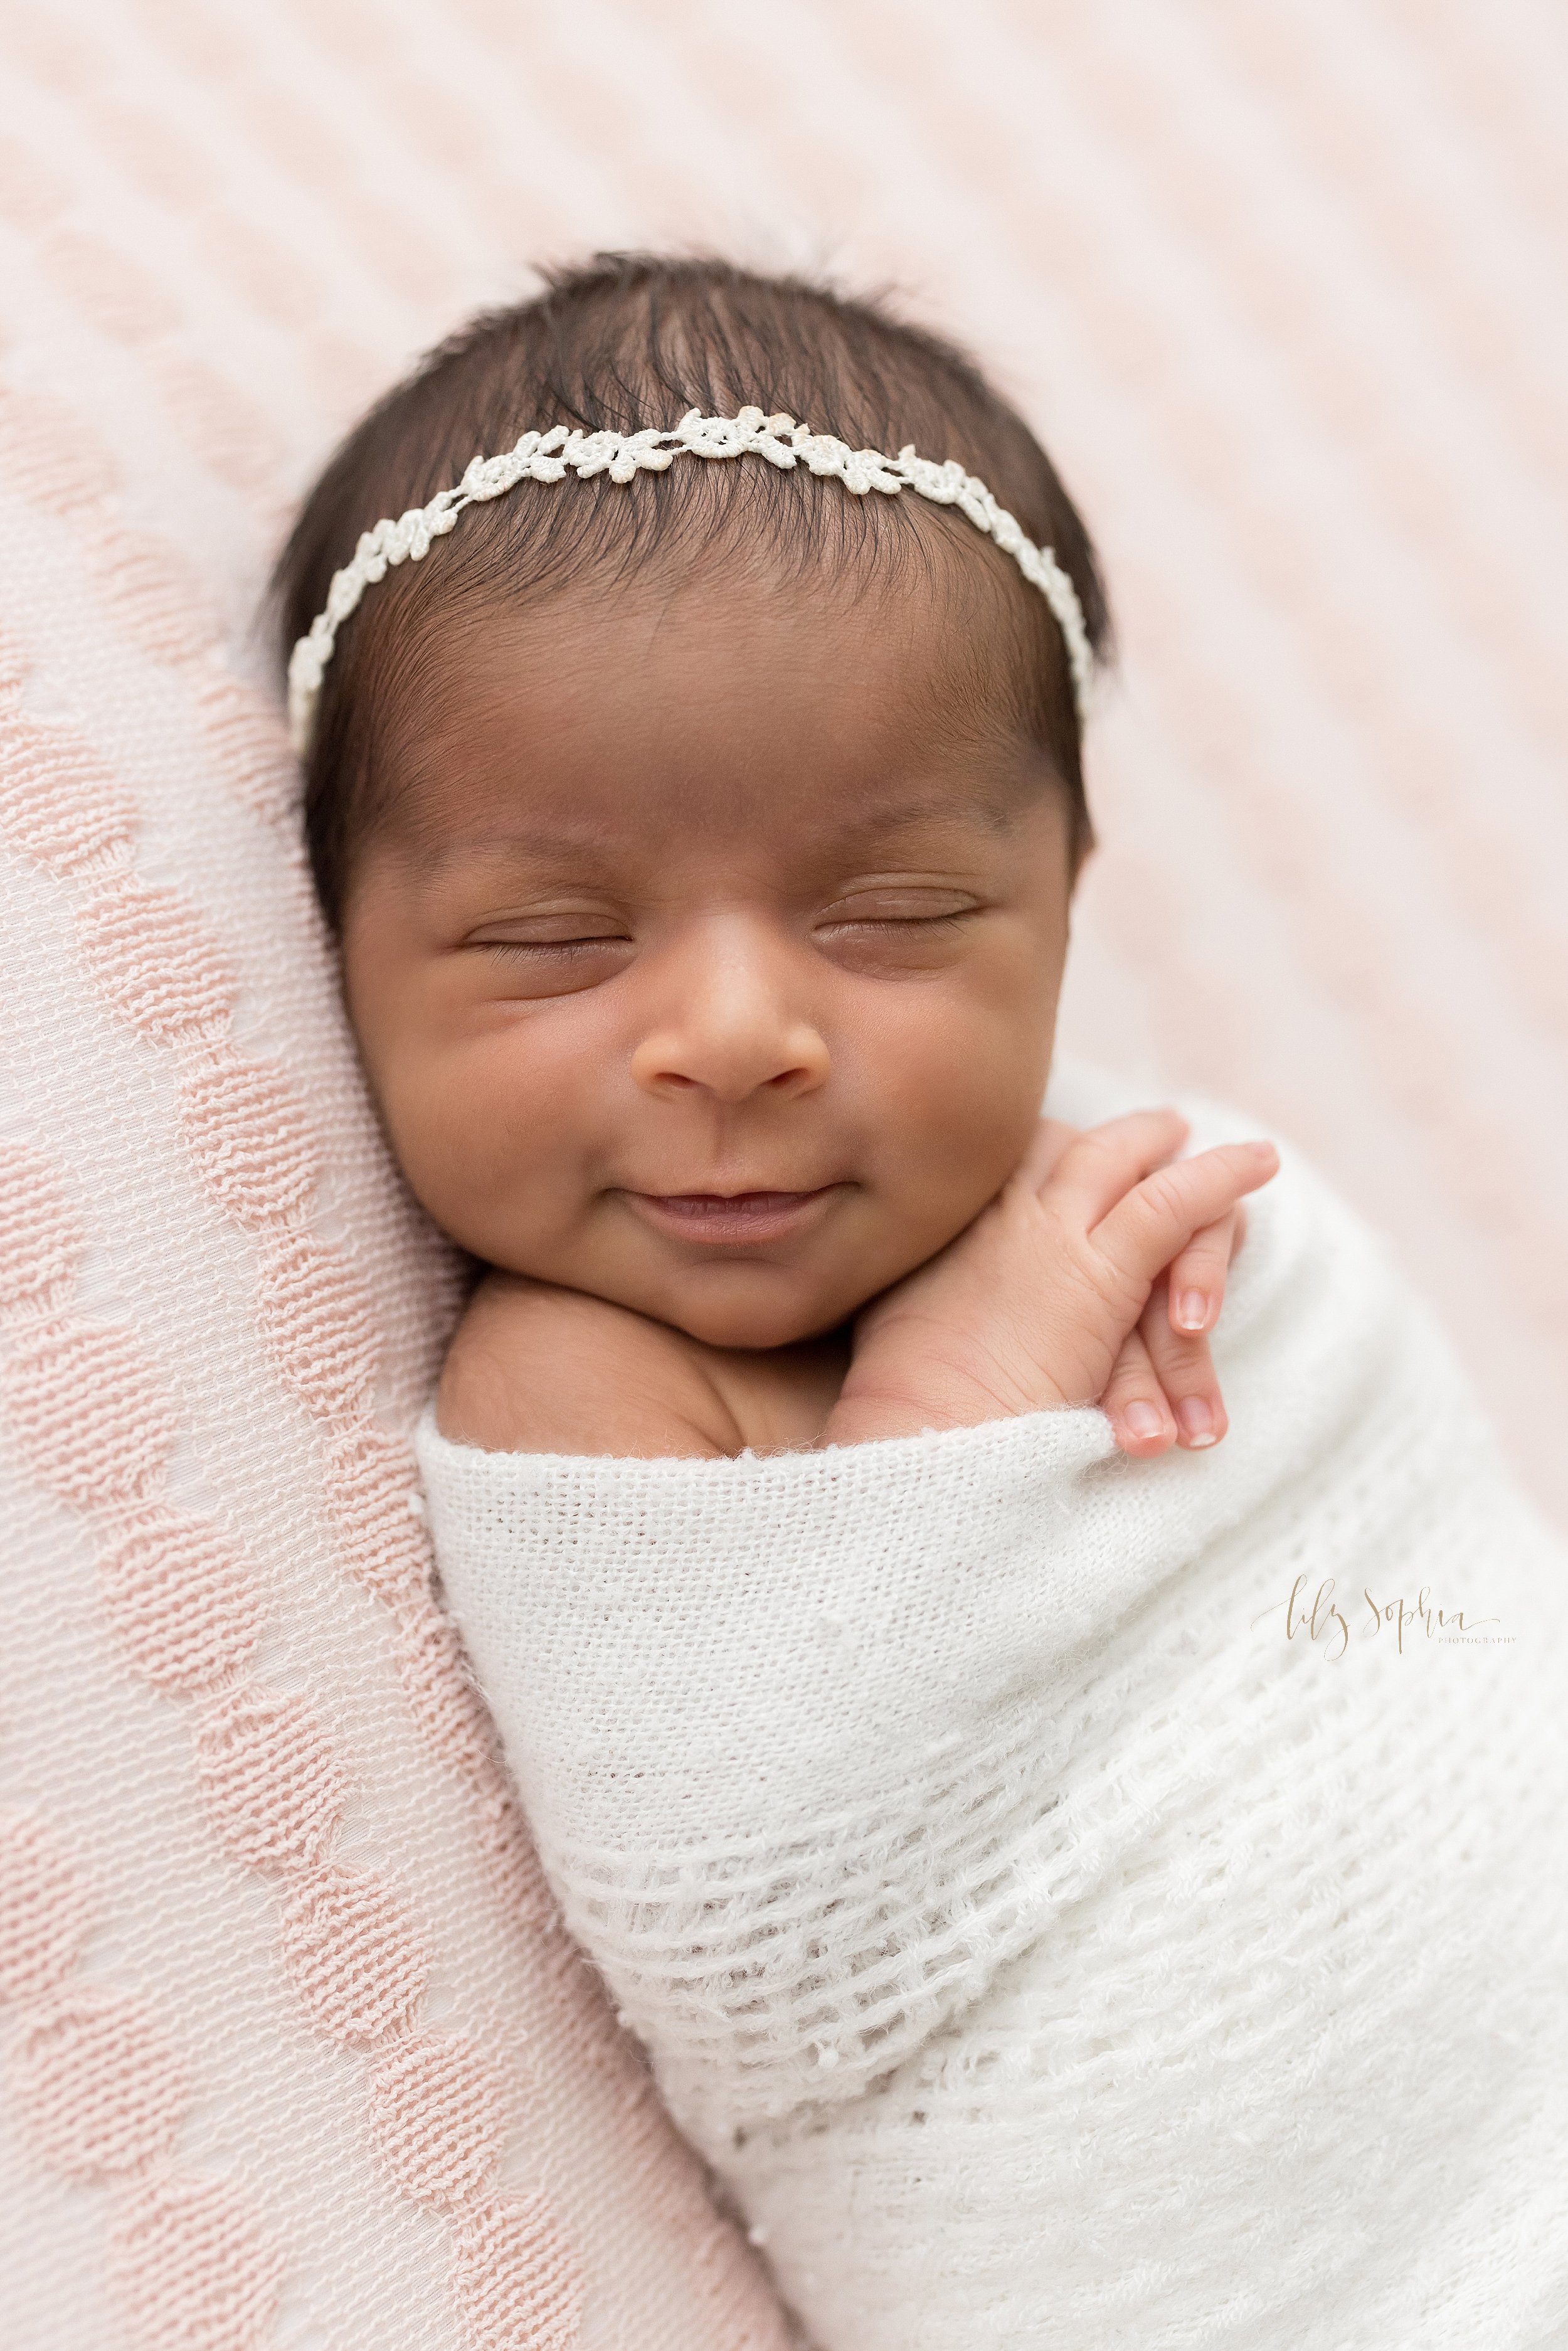  Newborn portrait of an Indian newborn baby girl wearing a laurel headband in her hair lying on her back smiling as she peacefully sleeps with her tiny hands peeking out from a soft white knitted blanket taken near Oakhurst in Atlanta in a natural li